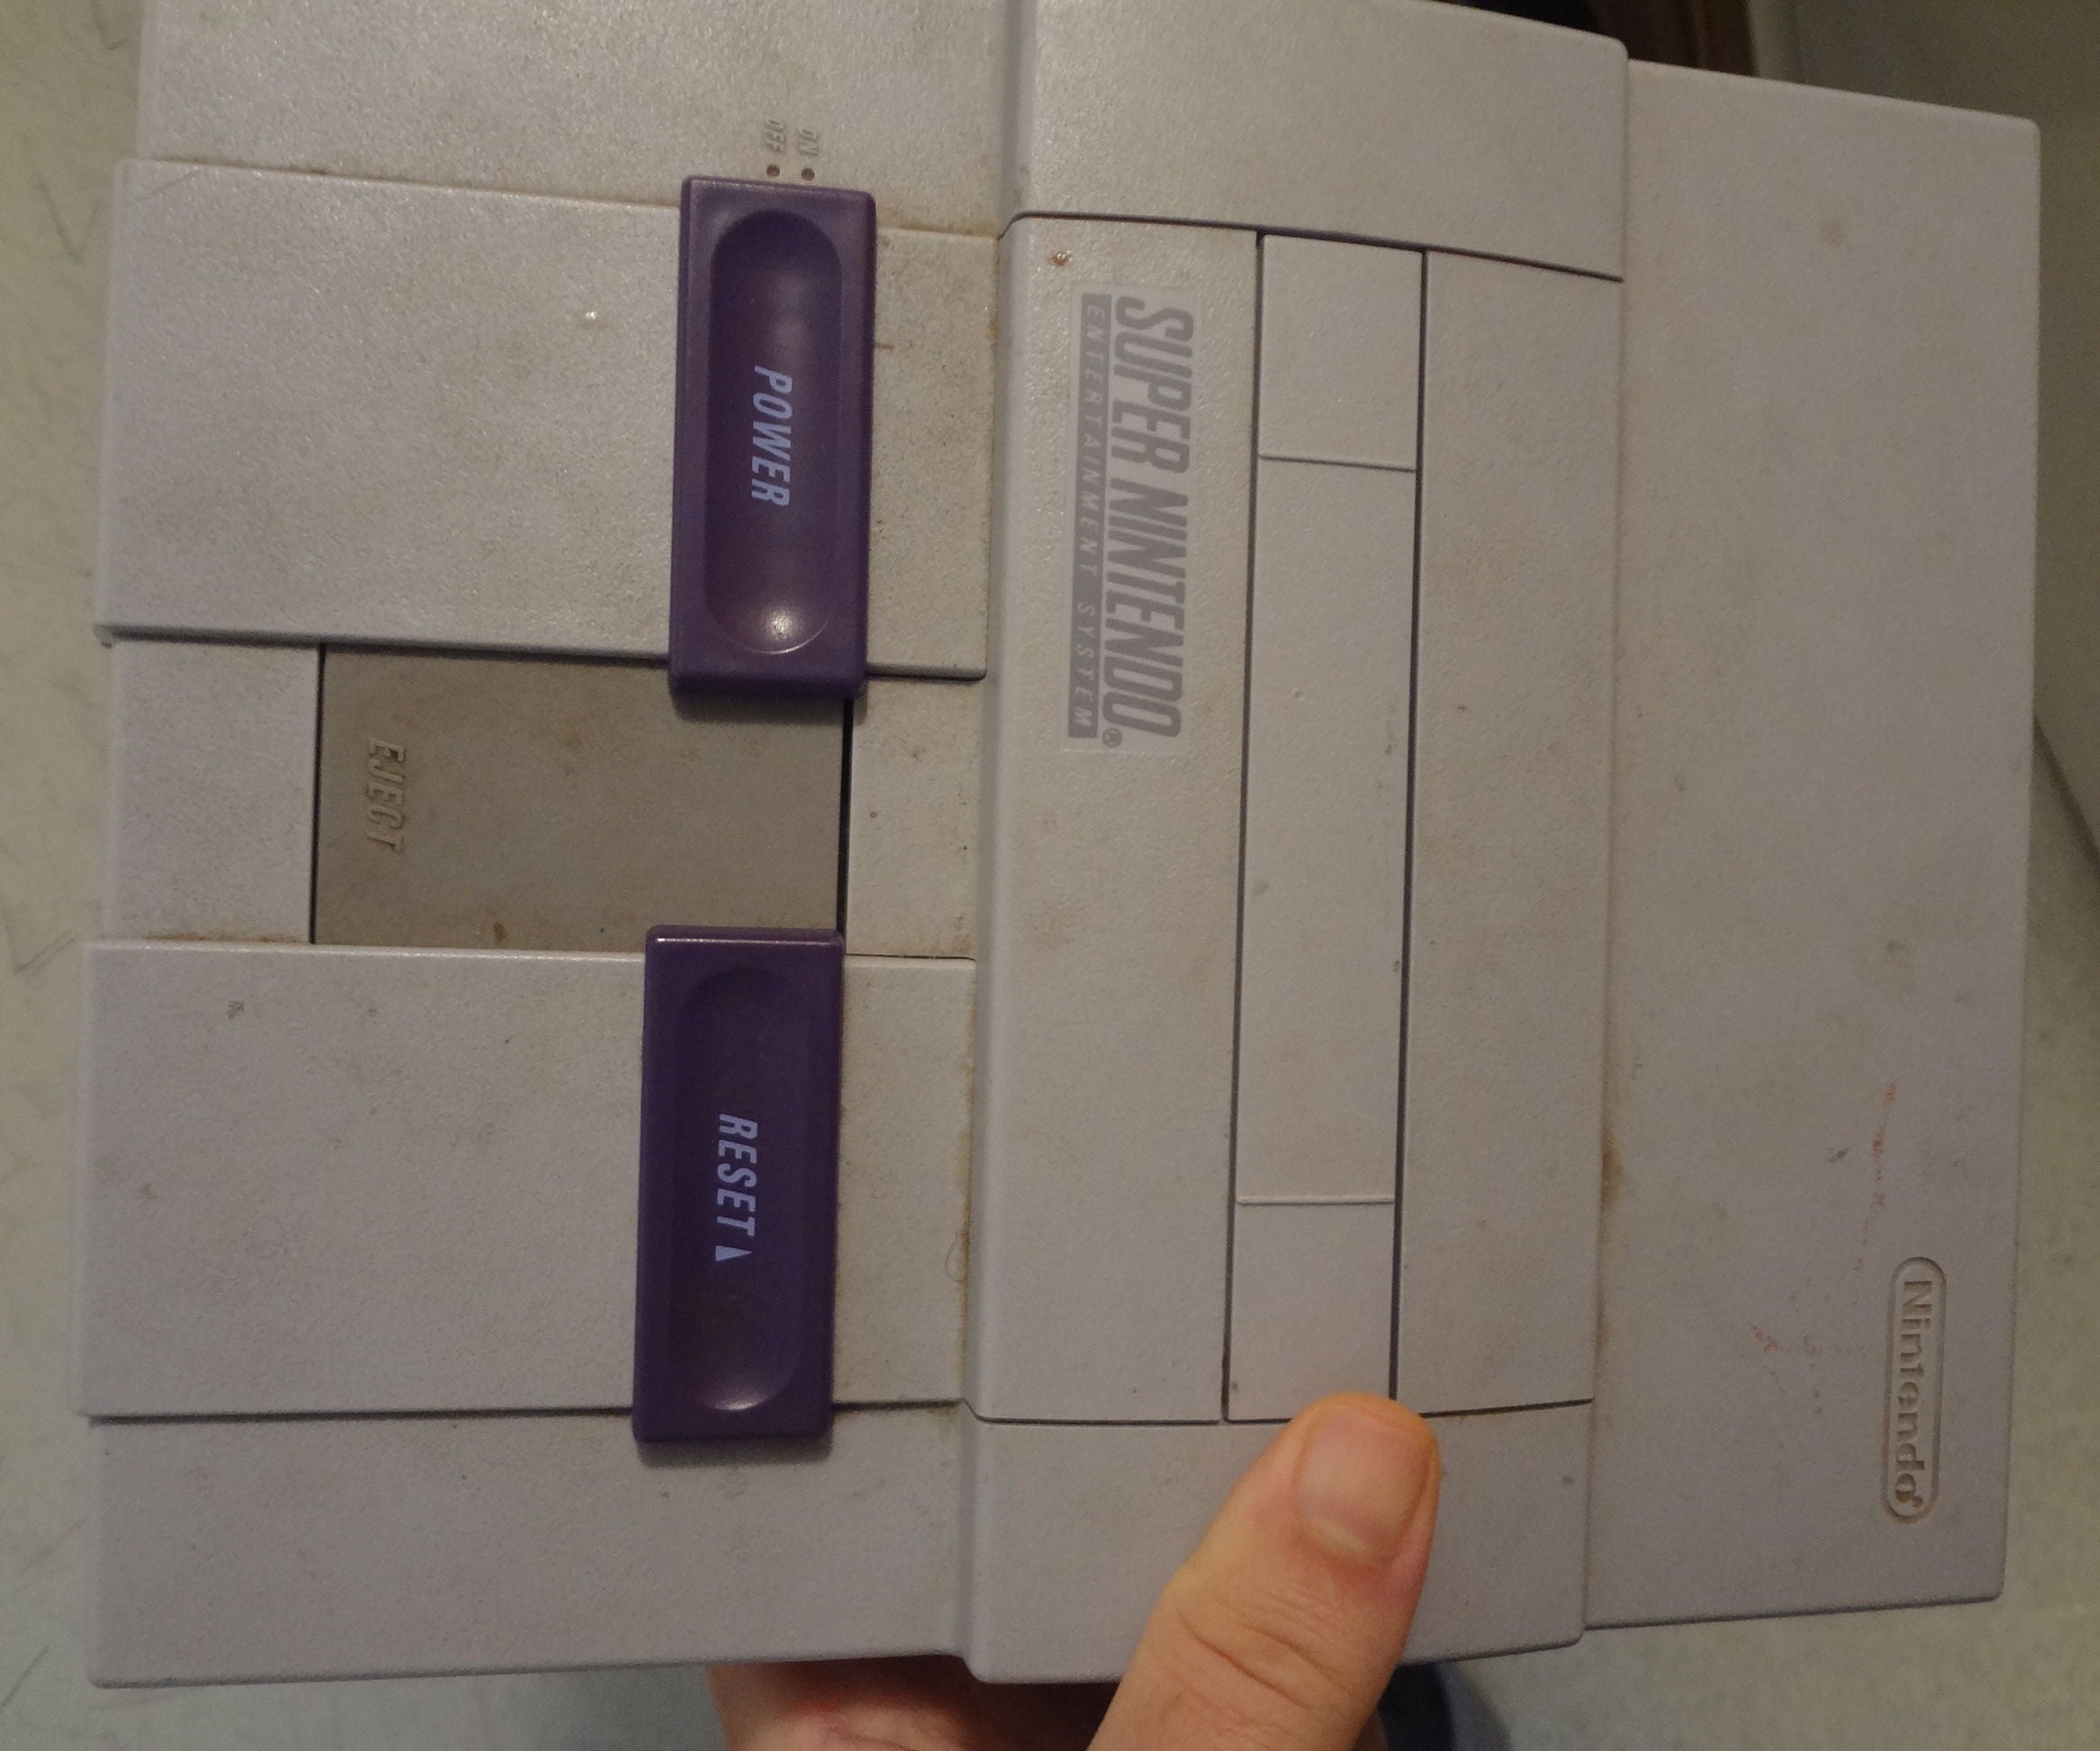 Super Nintendo Power Plug Input Replaced With Common Style.